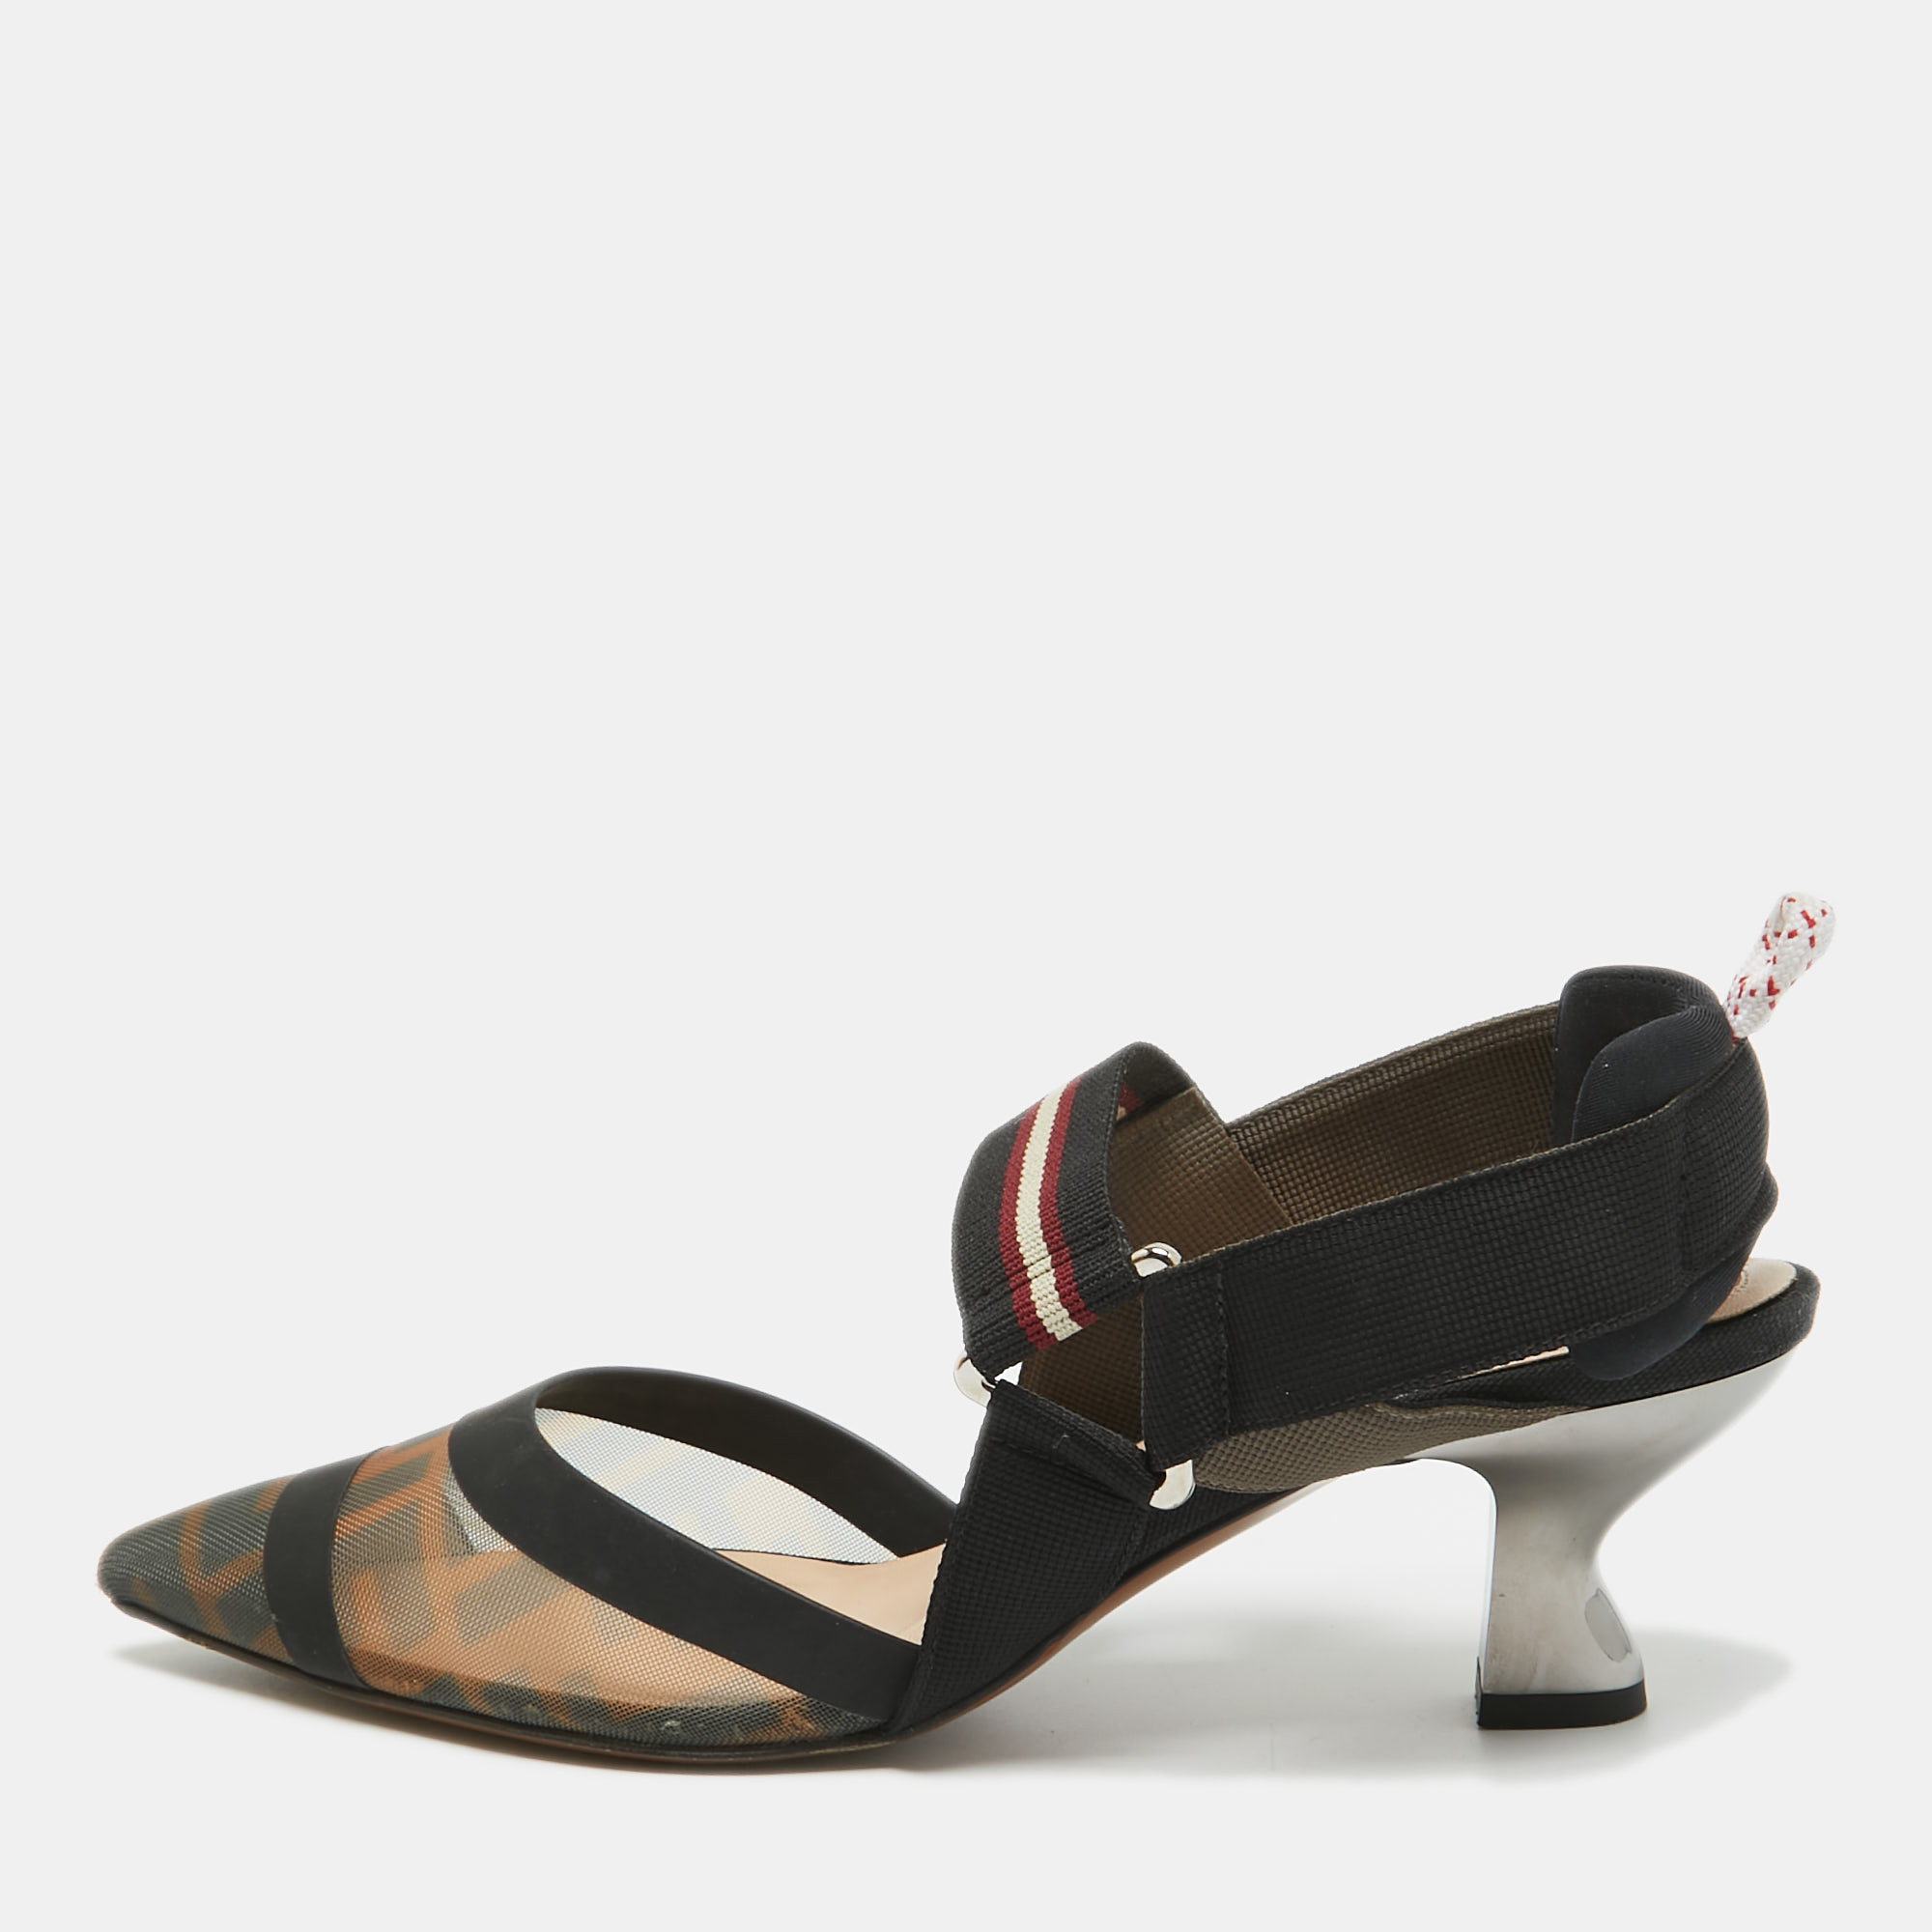 Wonderfully crafted shoes added with notable elements to fit well and pair perfectly with all your plans. Make these Fendi slingback pumps yours today